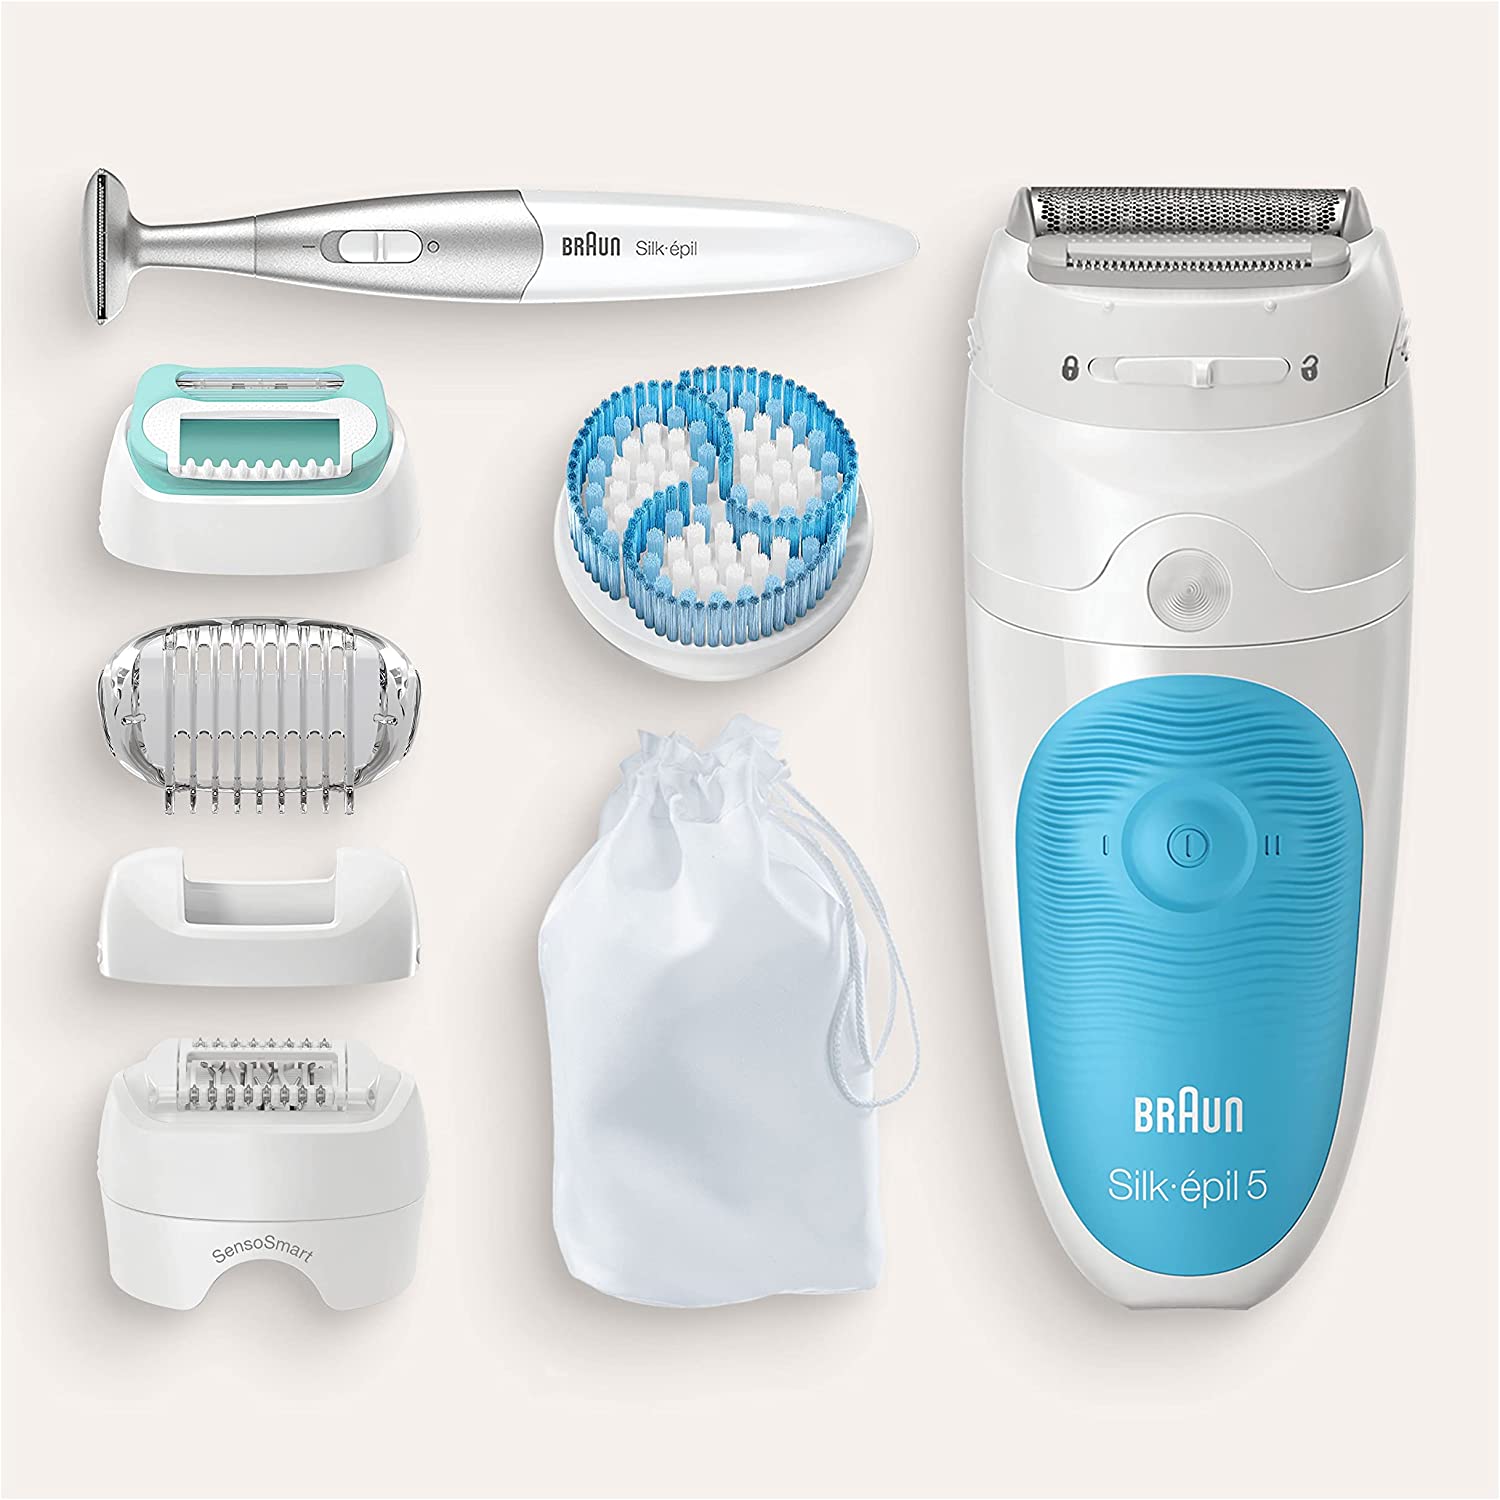 Braun Silk-épil 5, Epilator for Gentle Hair Removal, with 5 Extras, Pouch, Bikini Styler, 5-815 - Healthxpress.ie